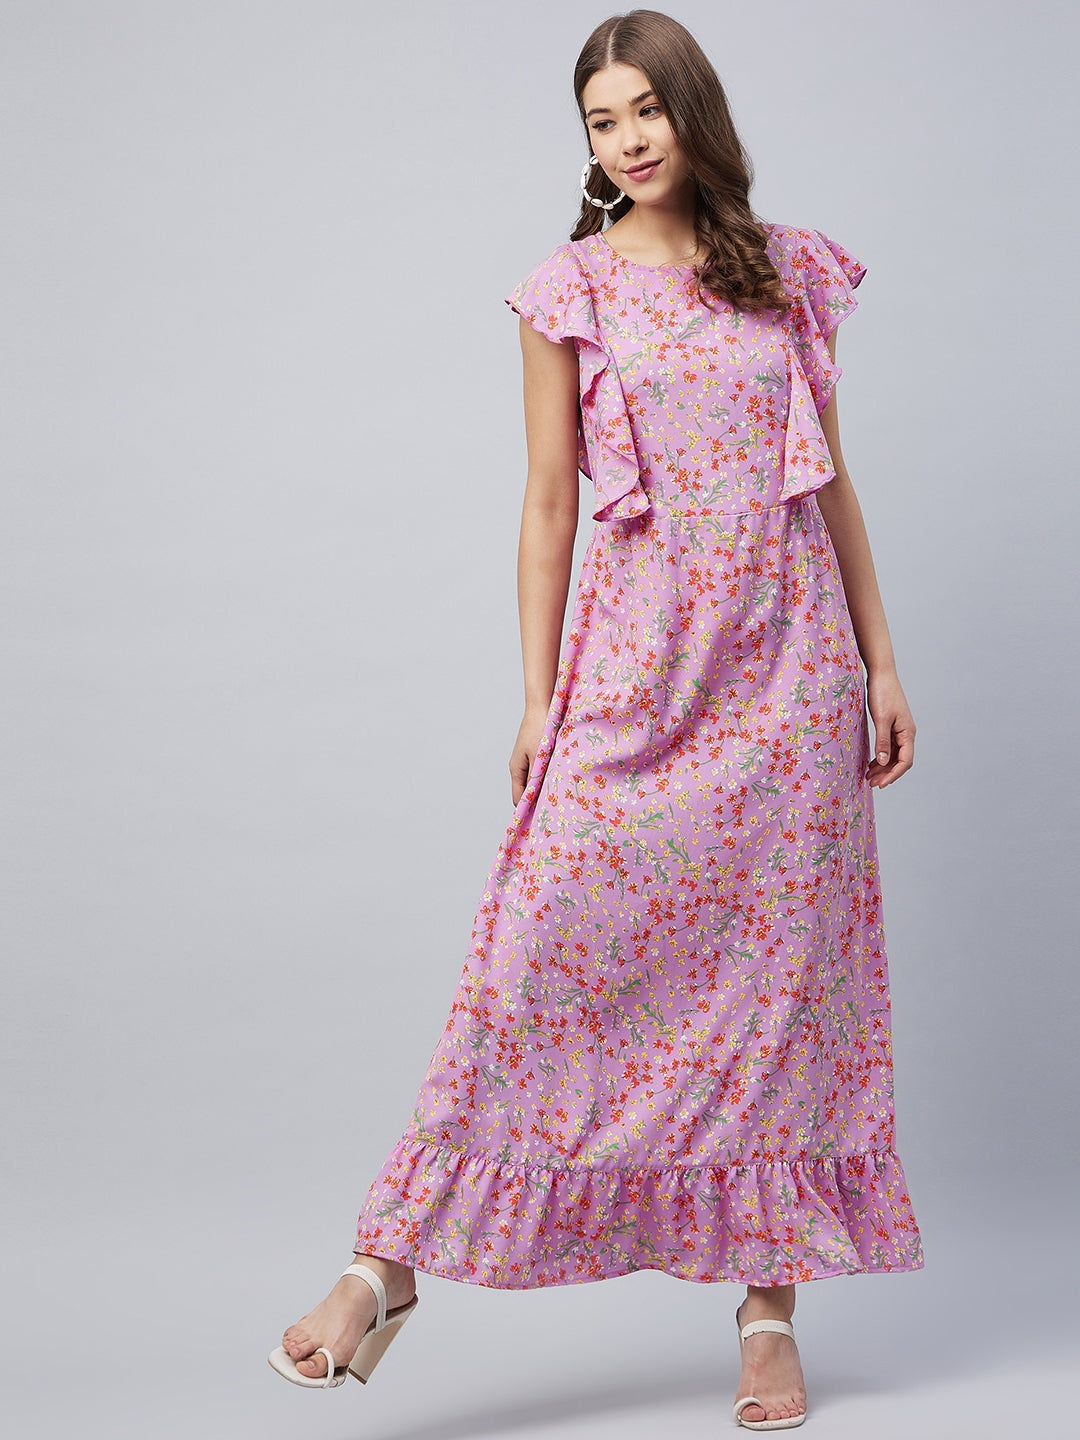 Women's Lavender Floral Maxi Dress with Flutter Sleeves